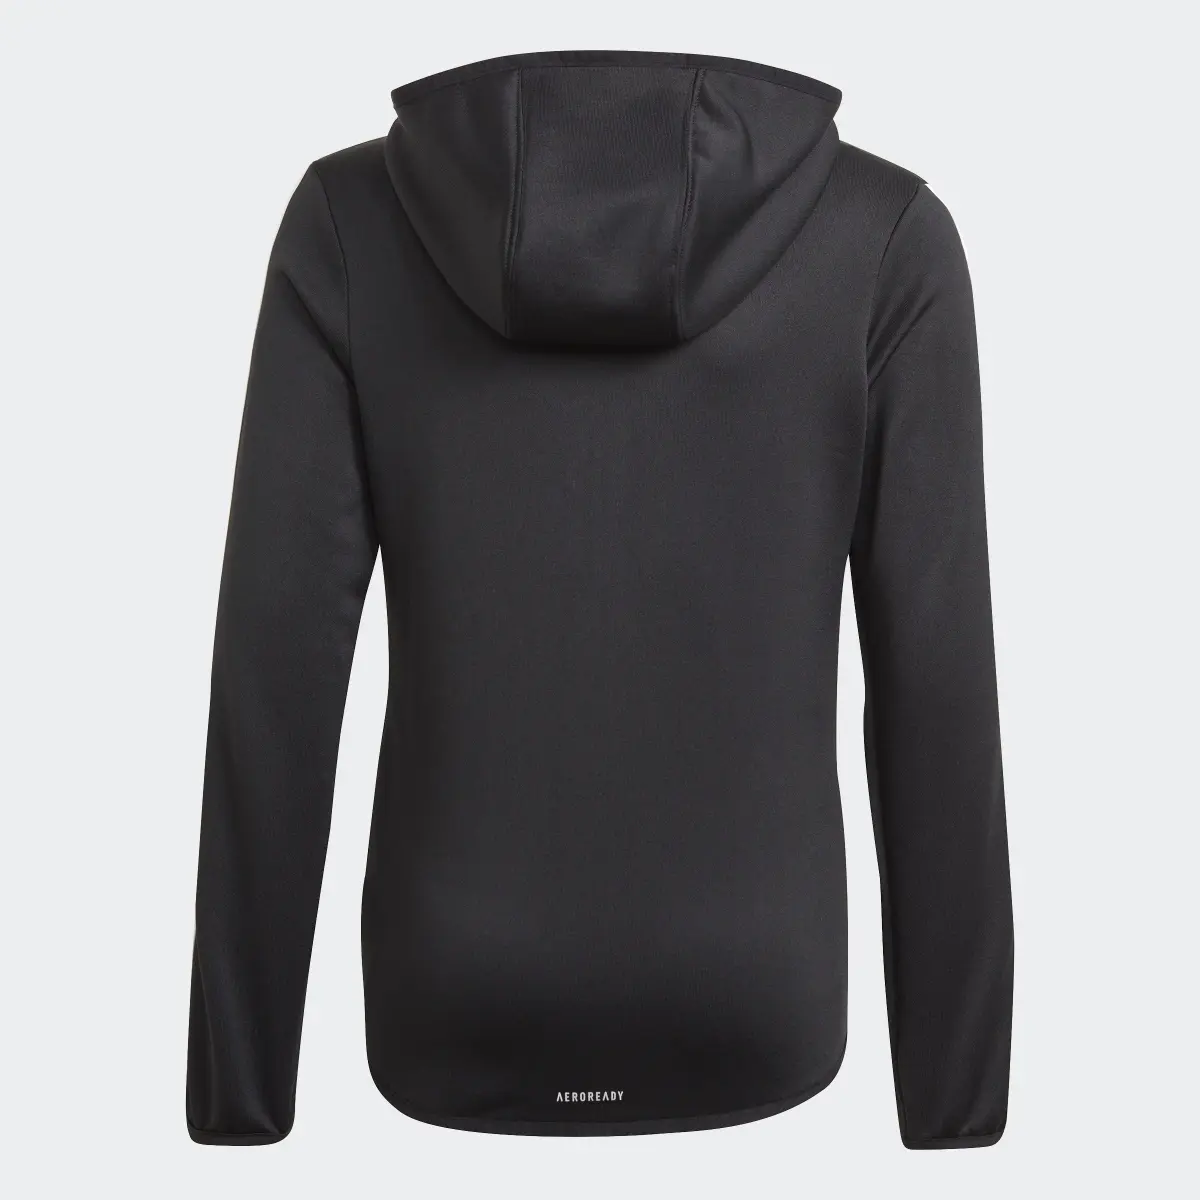 Adidas Designed To Move 3-Stripes Full-Zip Hoodie. 2